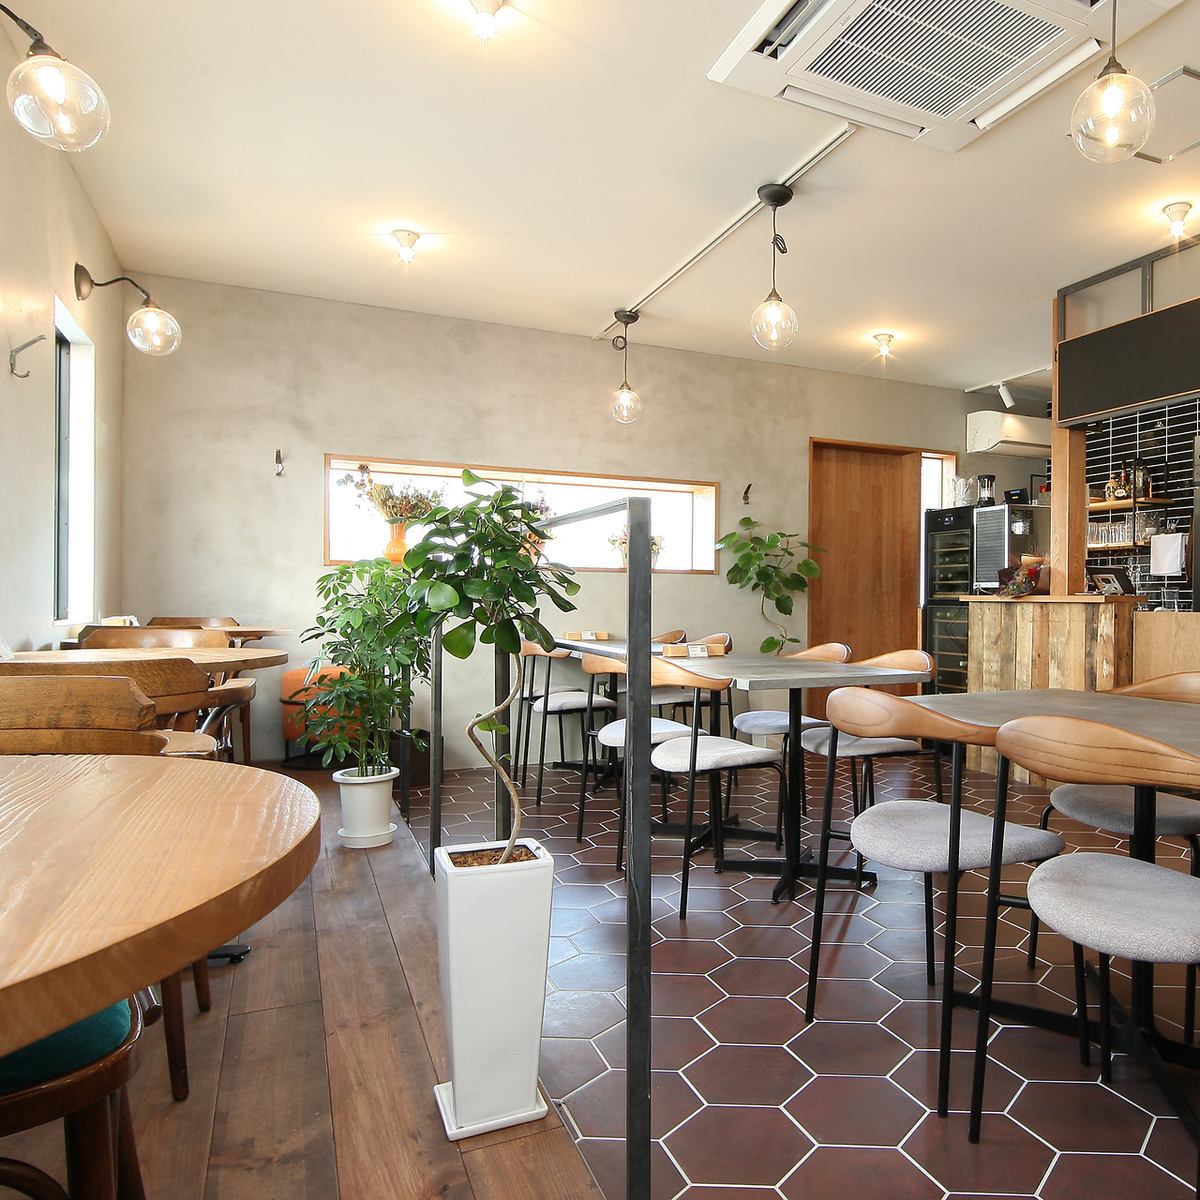 Private rentals are also possible upon consultation!Conveniently located within walking distance from Maebashi Station and Chuo-Maebashi Station◎